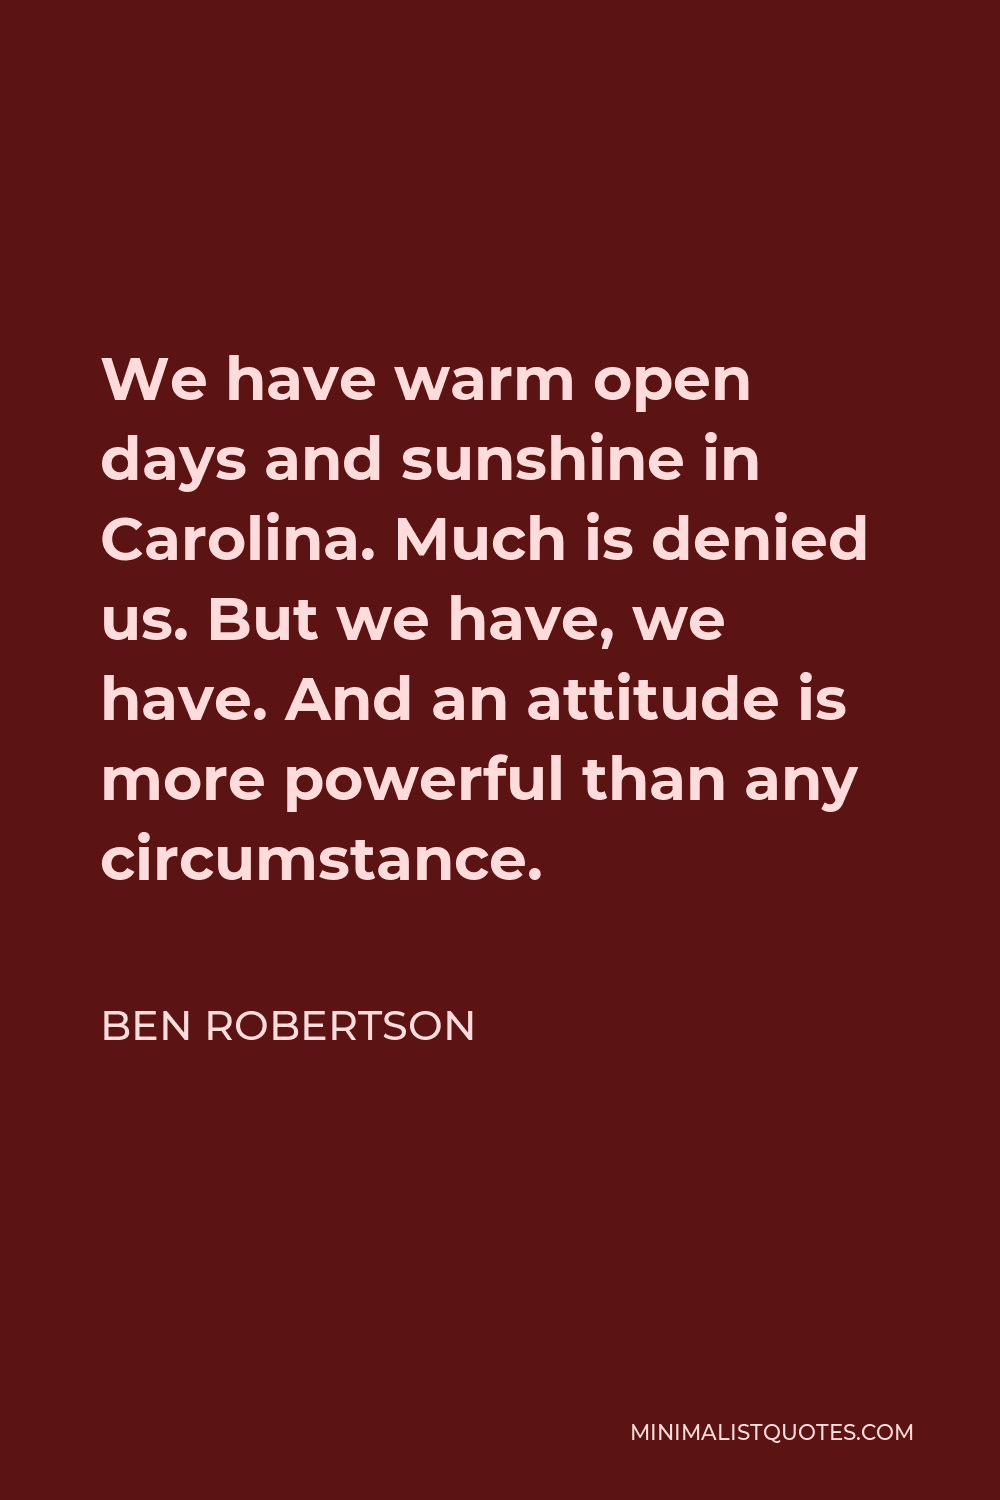 Ben Robertson Quote - We have warm open days and sunshine in Carolina. Much is denied us. But we have, we have. And an attitude is more powerful than any circumstance.